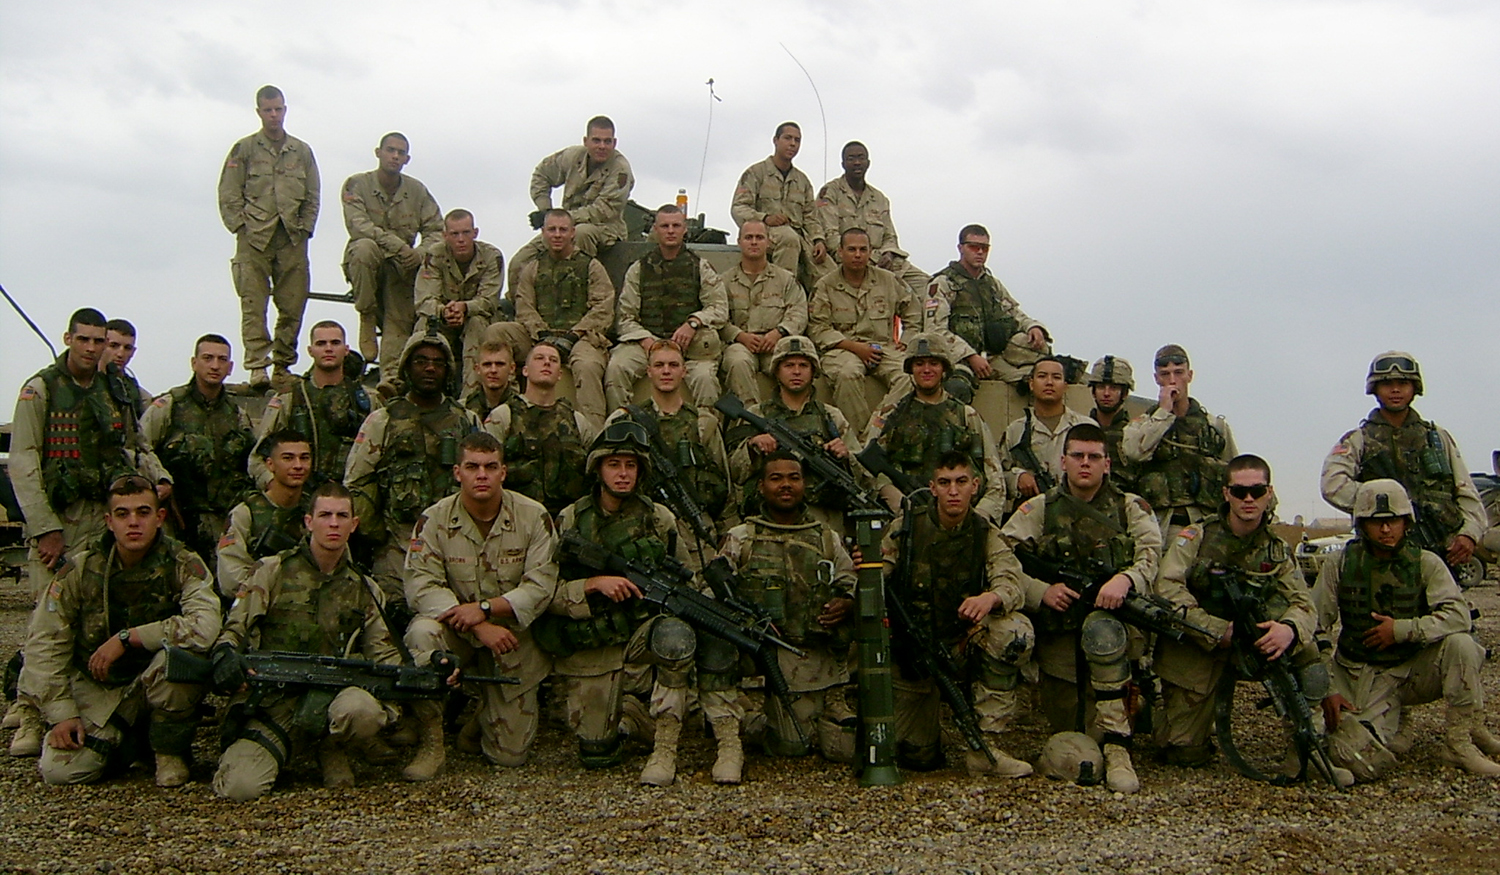 Soldiers with 3rd Platoon, Alpha Company, 2nd Battalion, 2nd Infantry Regiment, 3rd Brigade Combat Team, 1st Infantry Division, “The Mighty Third Herd,” moments before H-hour, Nov. 8, 2004. (Photo courtesy of David Bellavia)